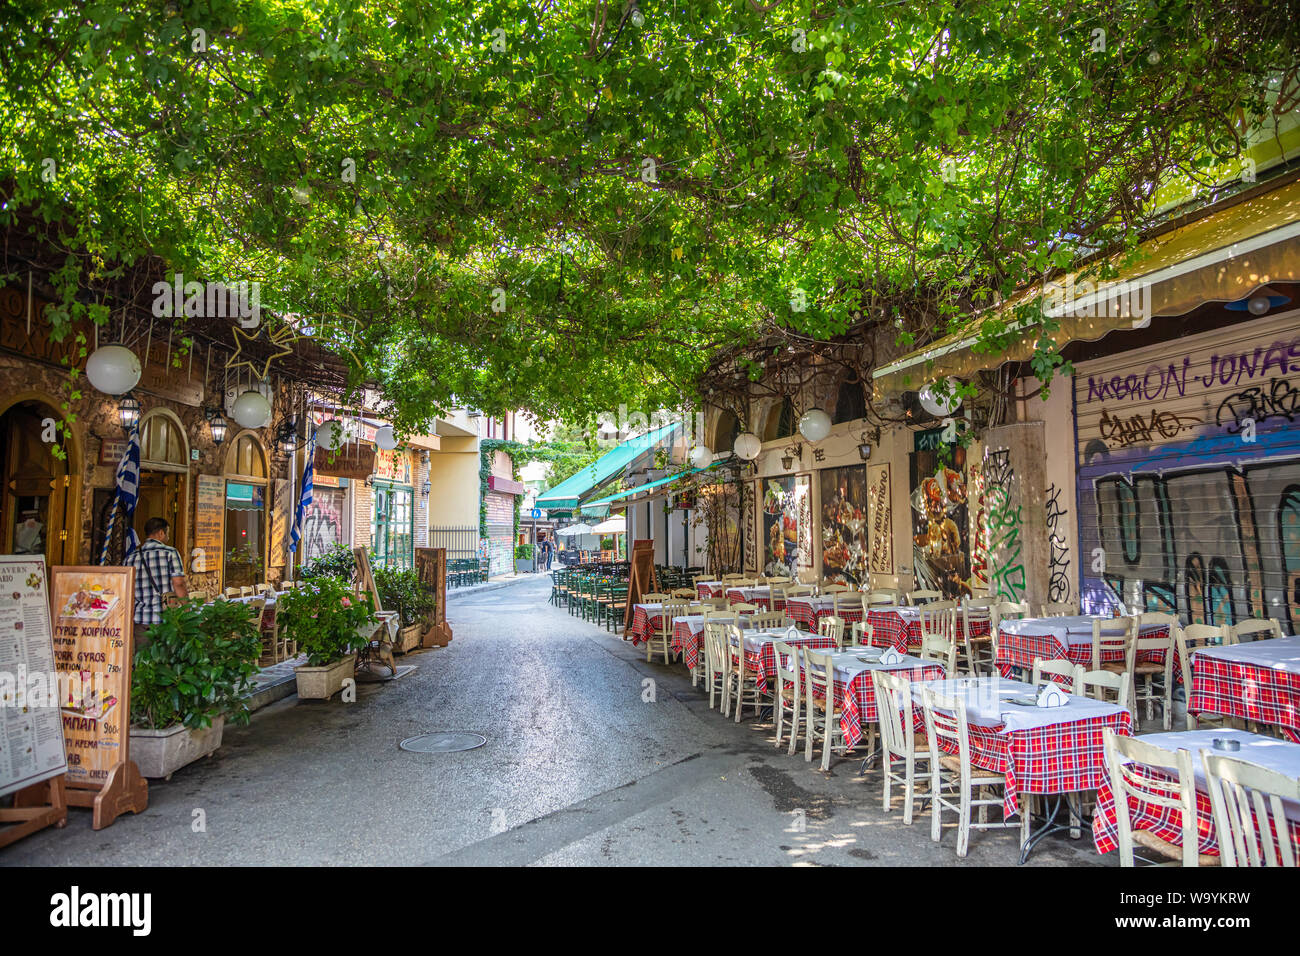 Athens, Greece - August 4, 2019: Plaka, narrow street with lush greenery and outside greek tavern tables in historical center Stock Photo